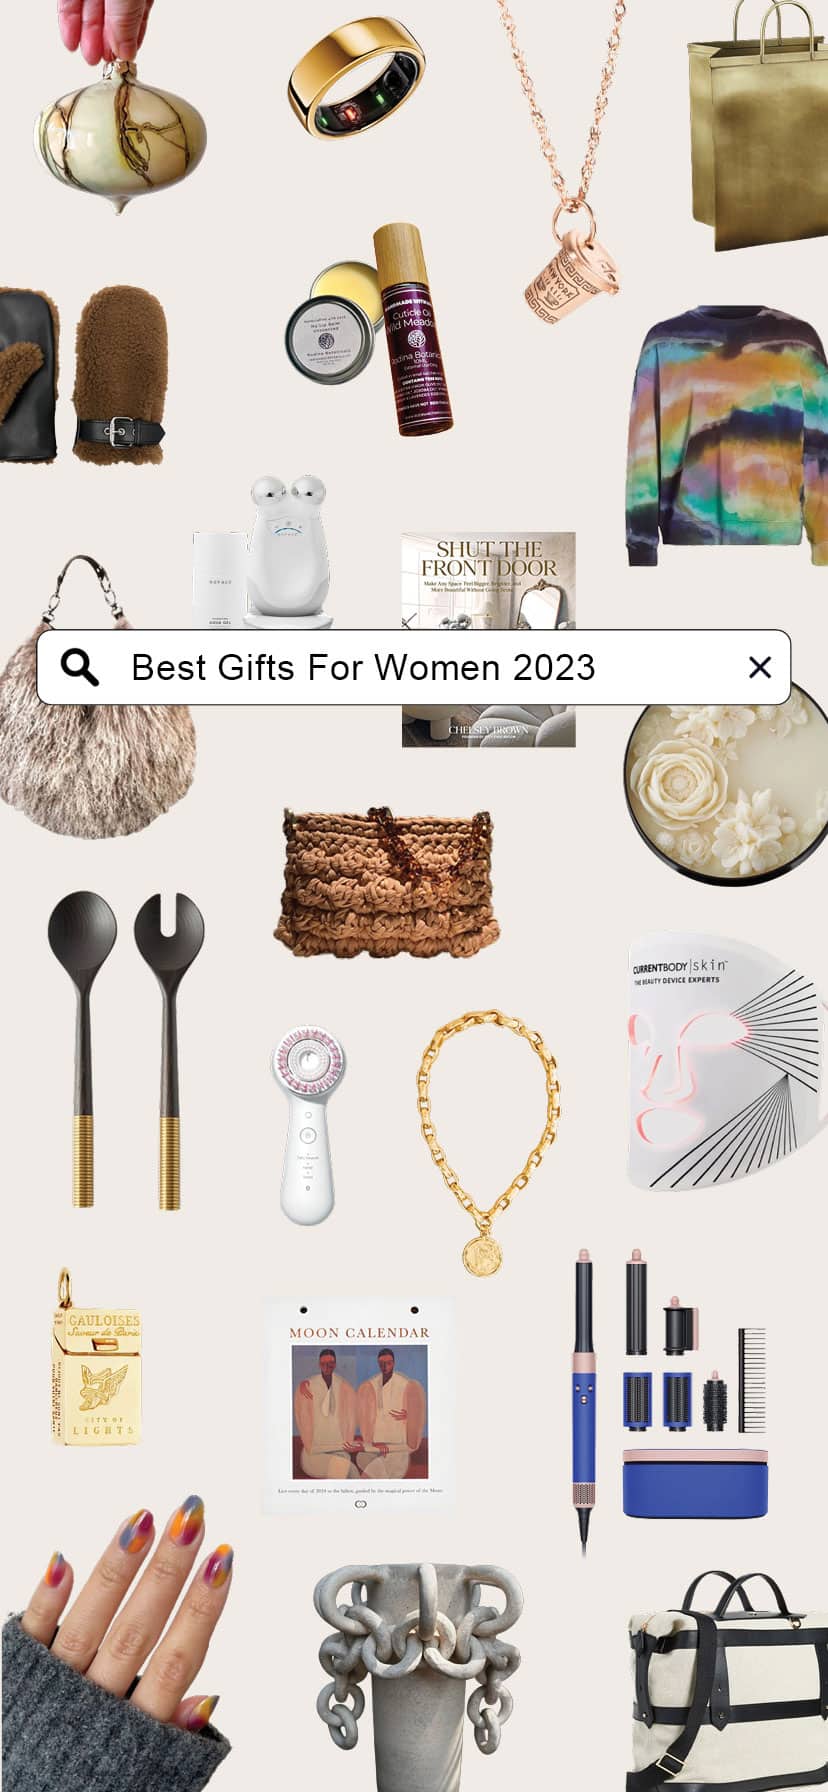 73 Best Gifts for Her in 2023 - Great Gift Ideas for Women